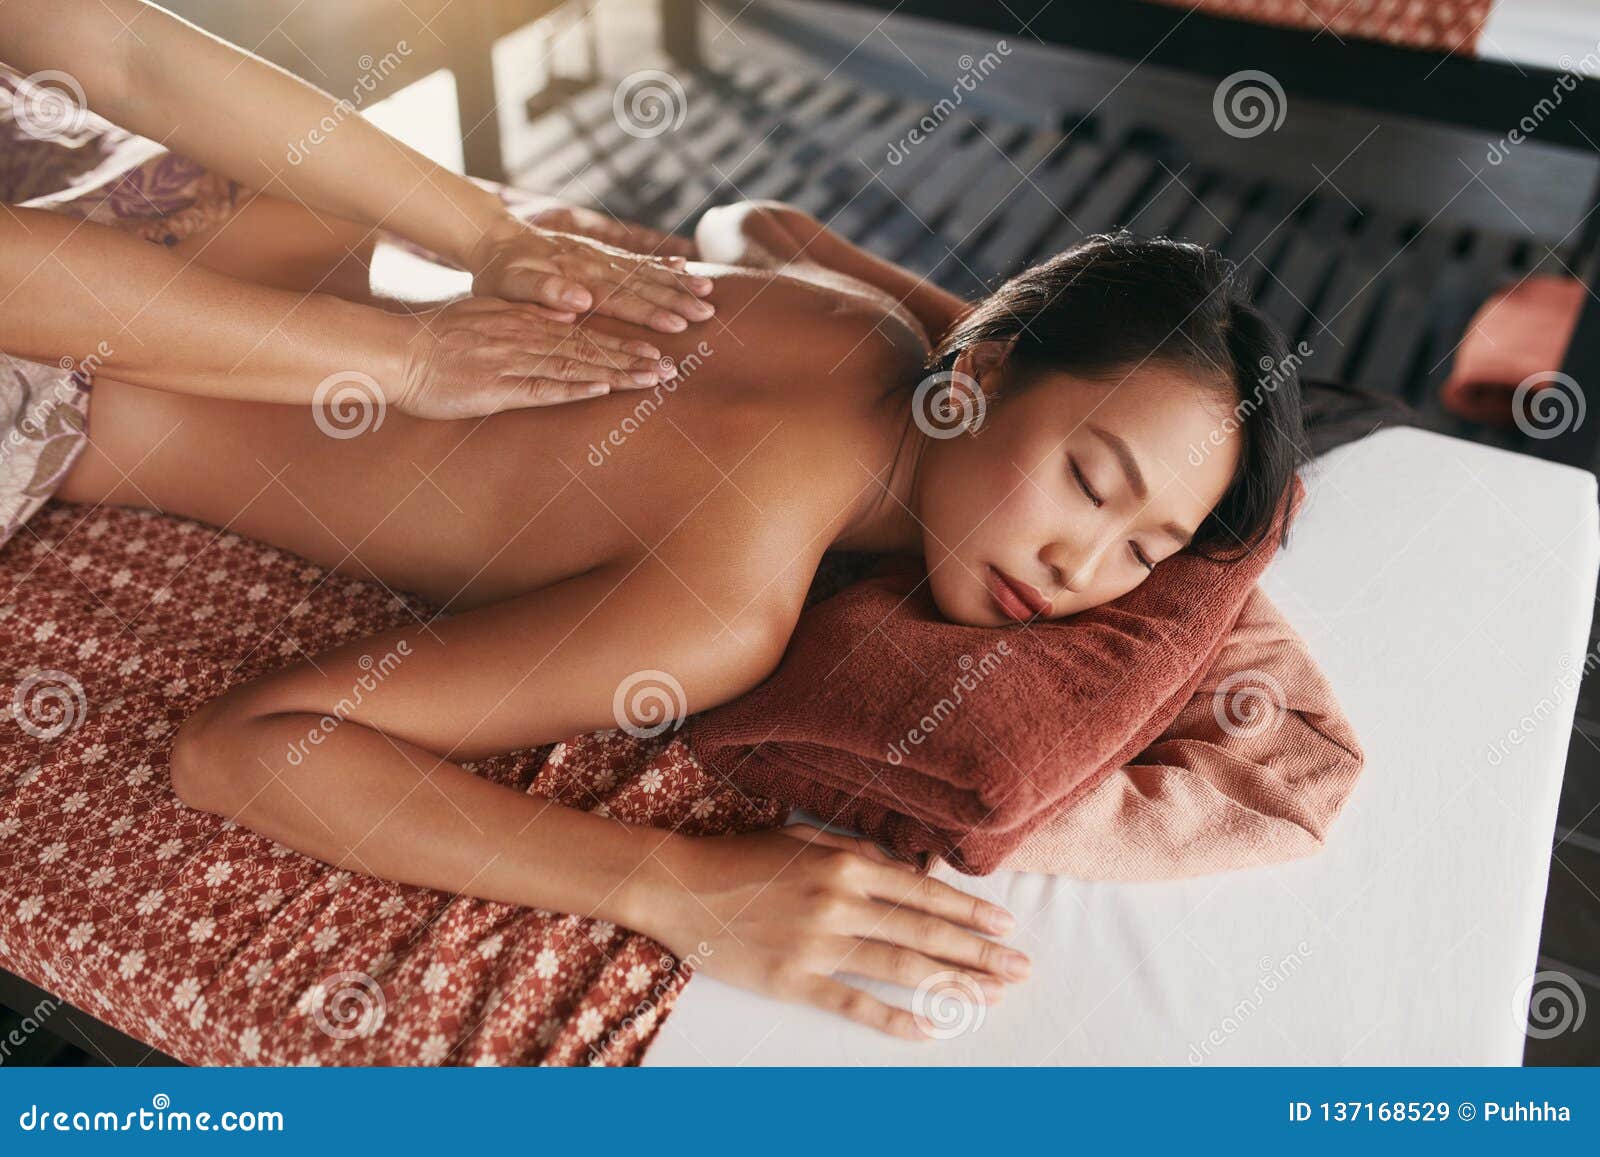 Back at Thai Spa. Having Body Massage at Salon Stock Image - Image of physiotherapy, hand: 137168529